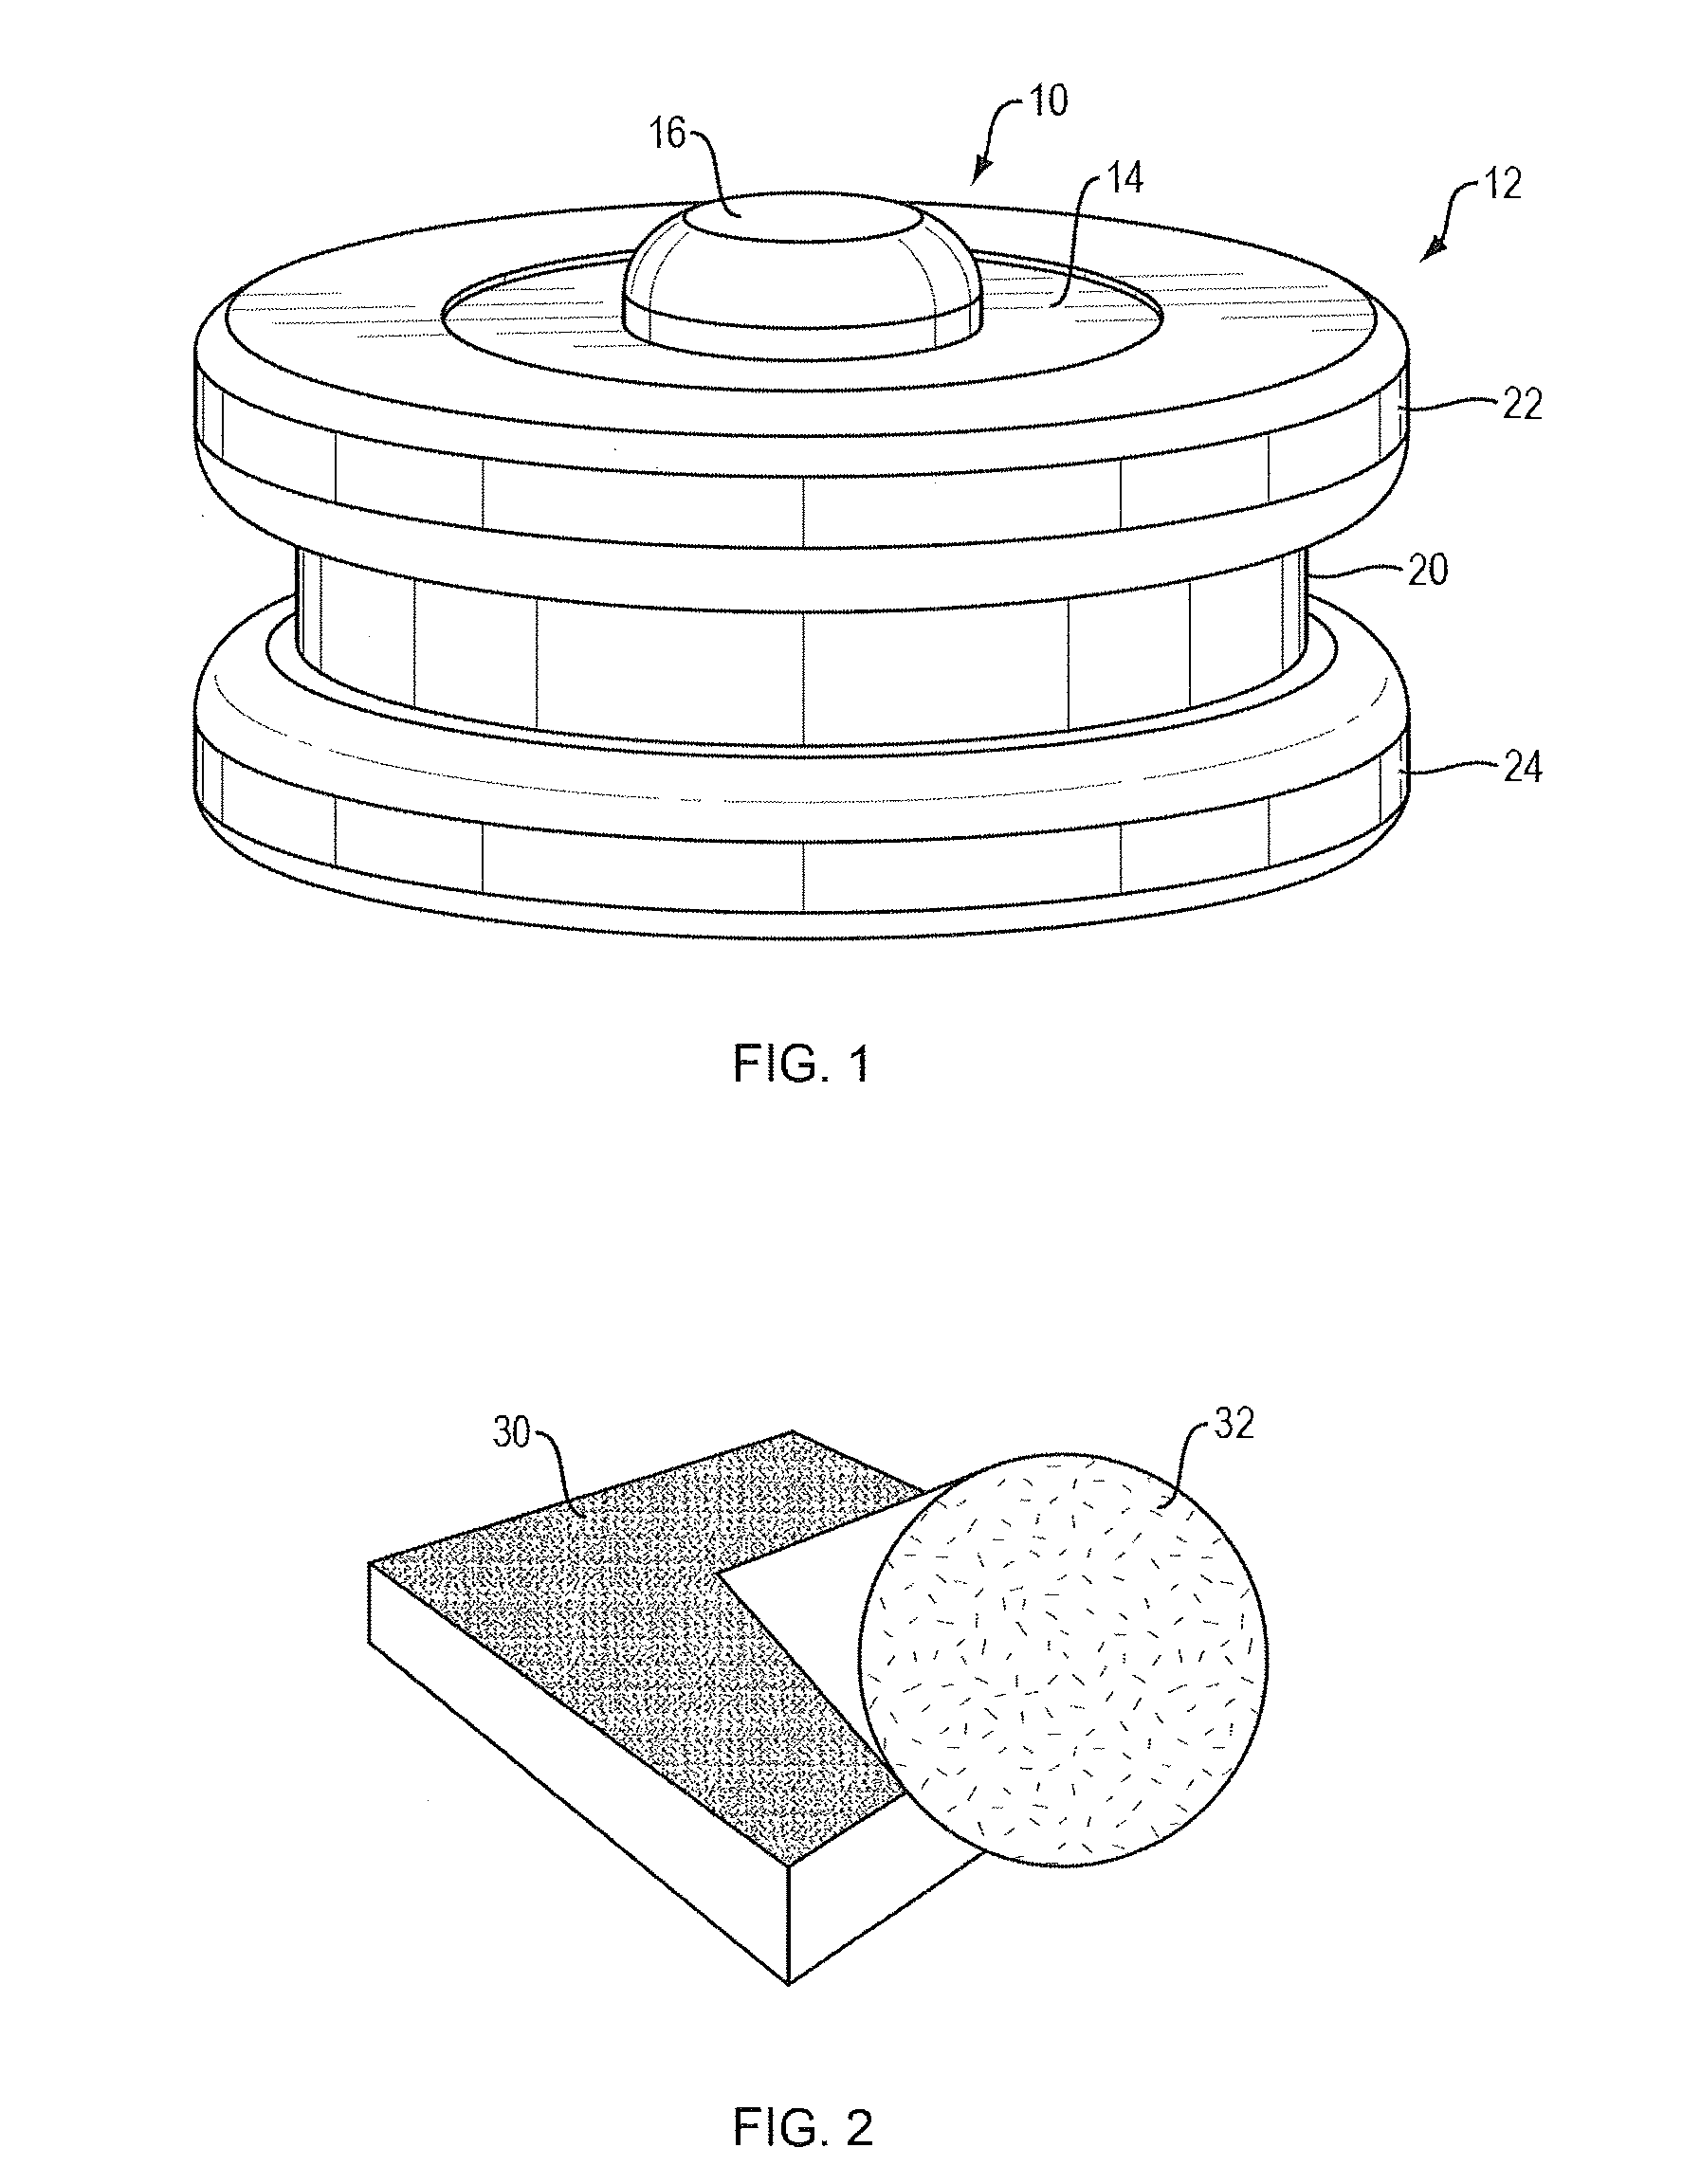 Apparatus and method for preconcentrating and transferring analytes from surfaces and measurement thereof using spectroscopy